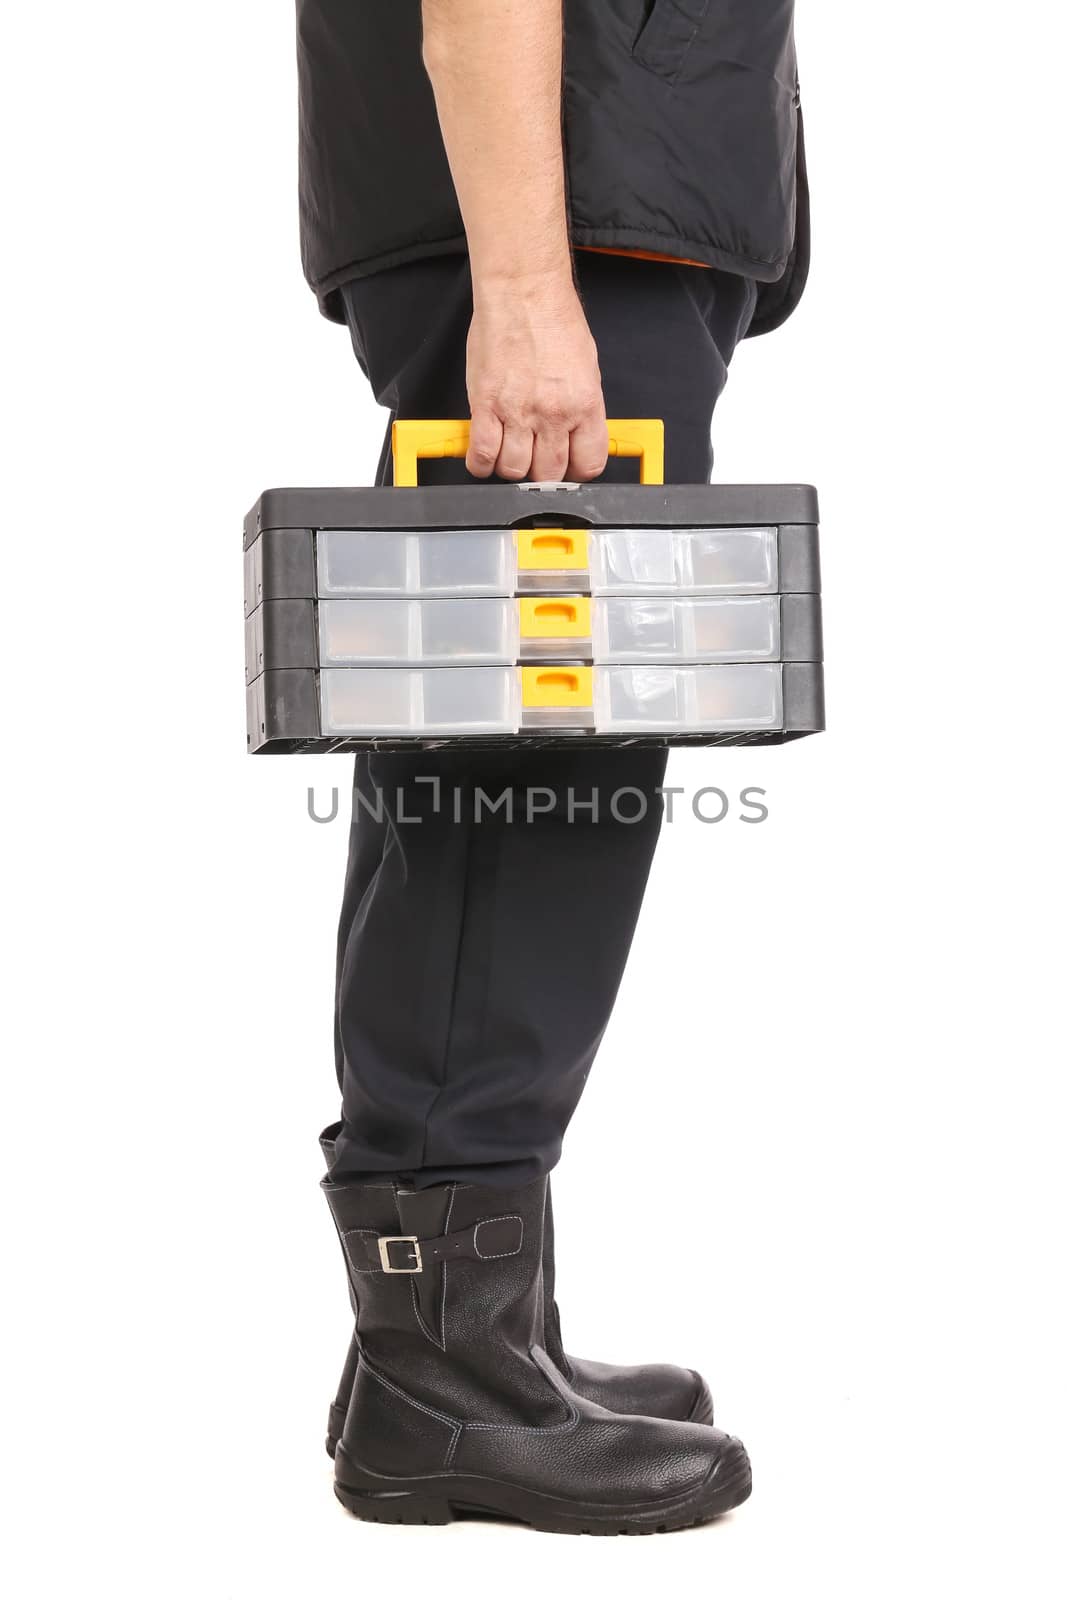 Set of tools for the builder in hand. On a white background.